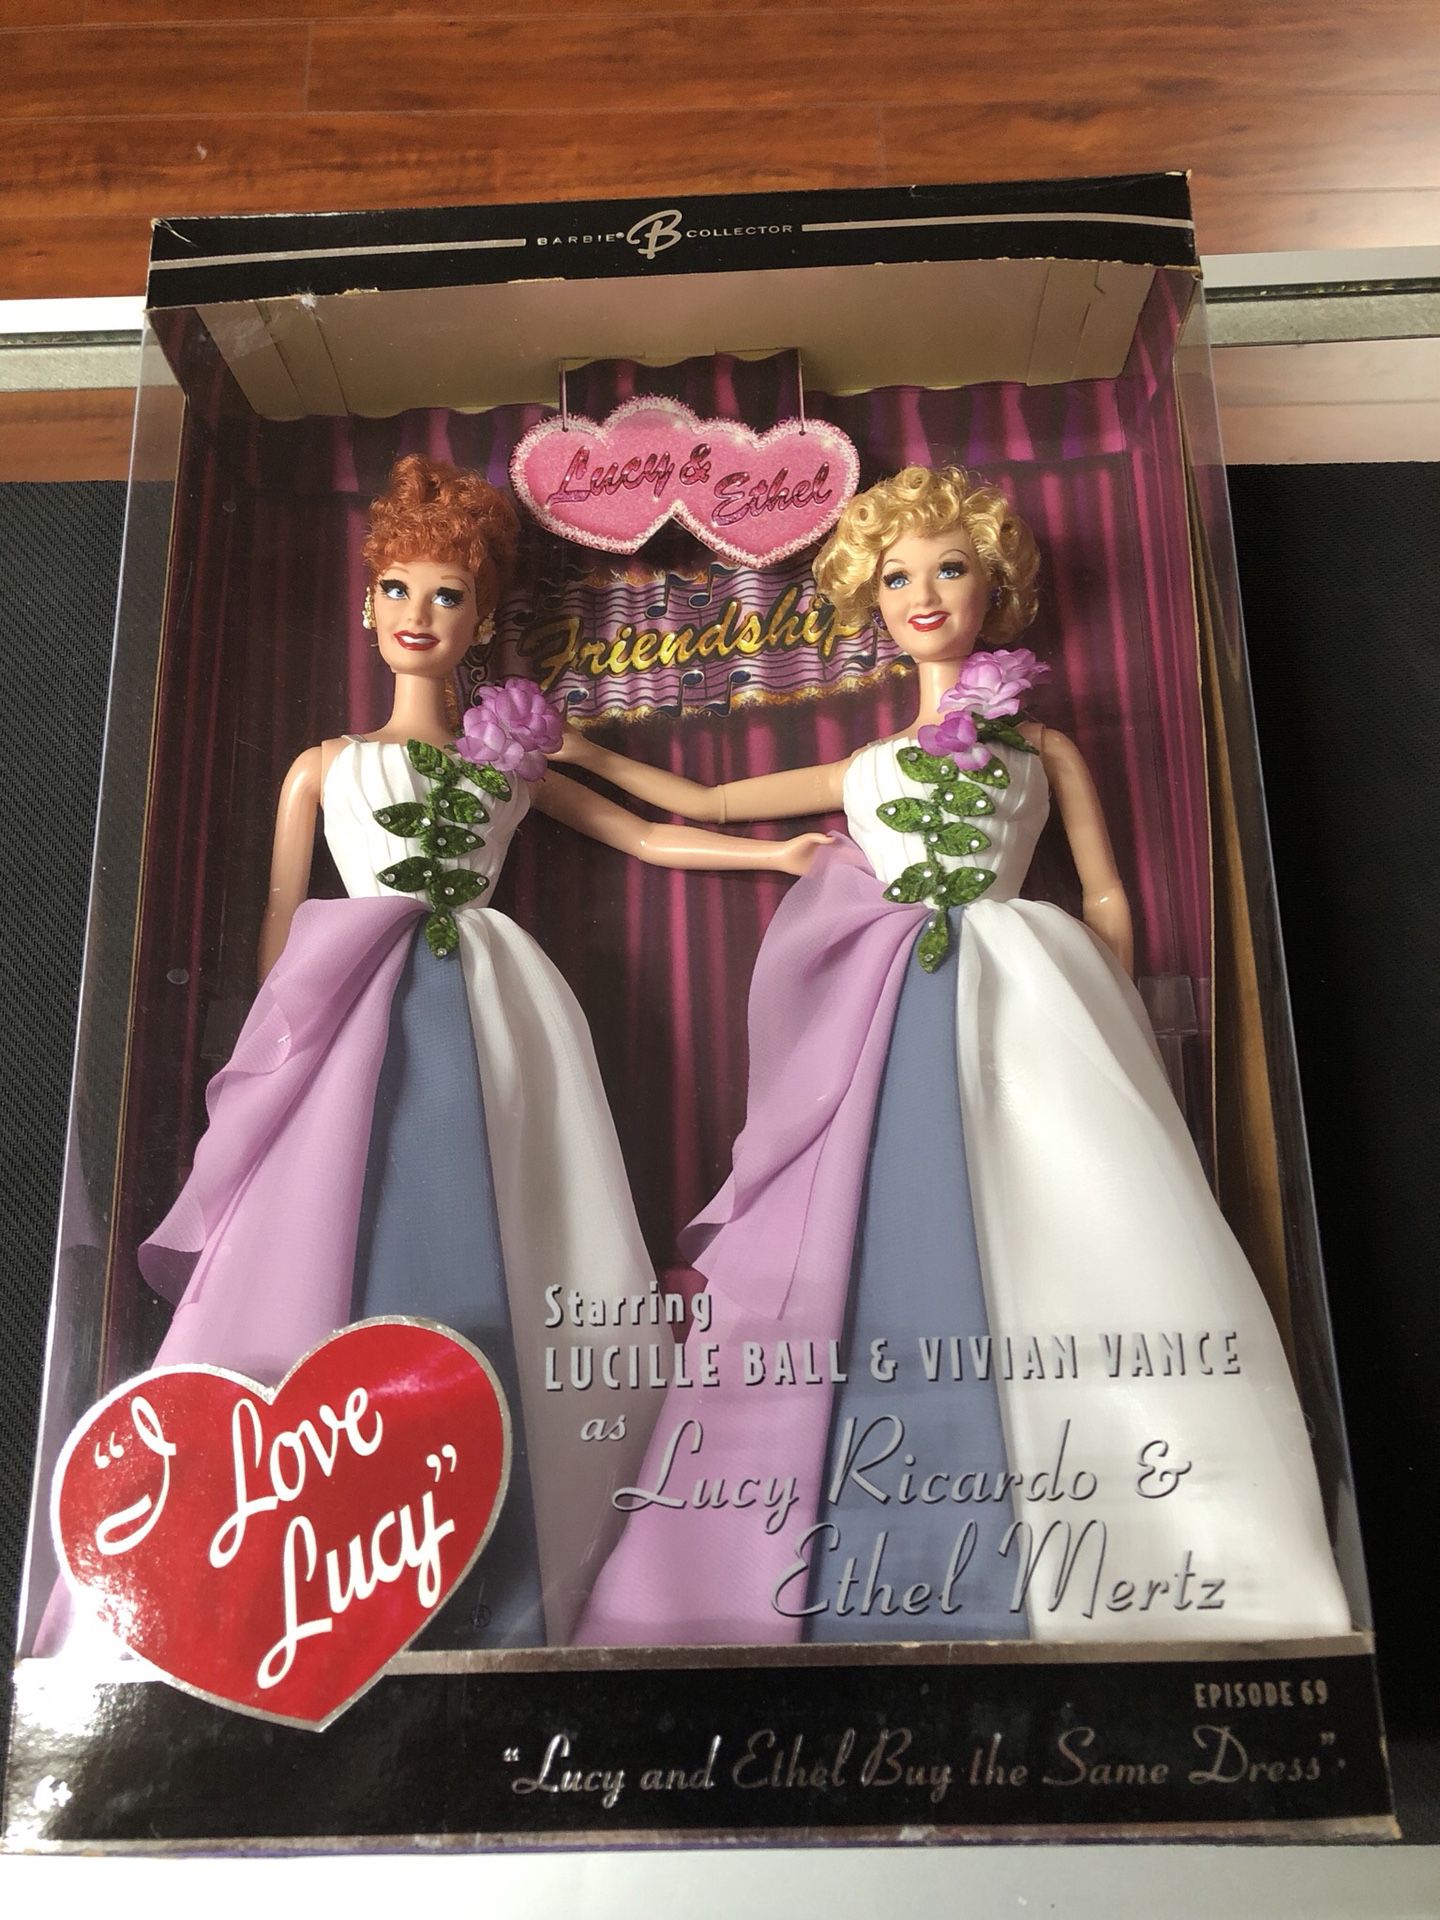 I Love Lucy Lucy Ricardo & Ethel Mertz Lucy and Ethel Buy the Same Dress Episode 69 Barbie Collector Mattel